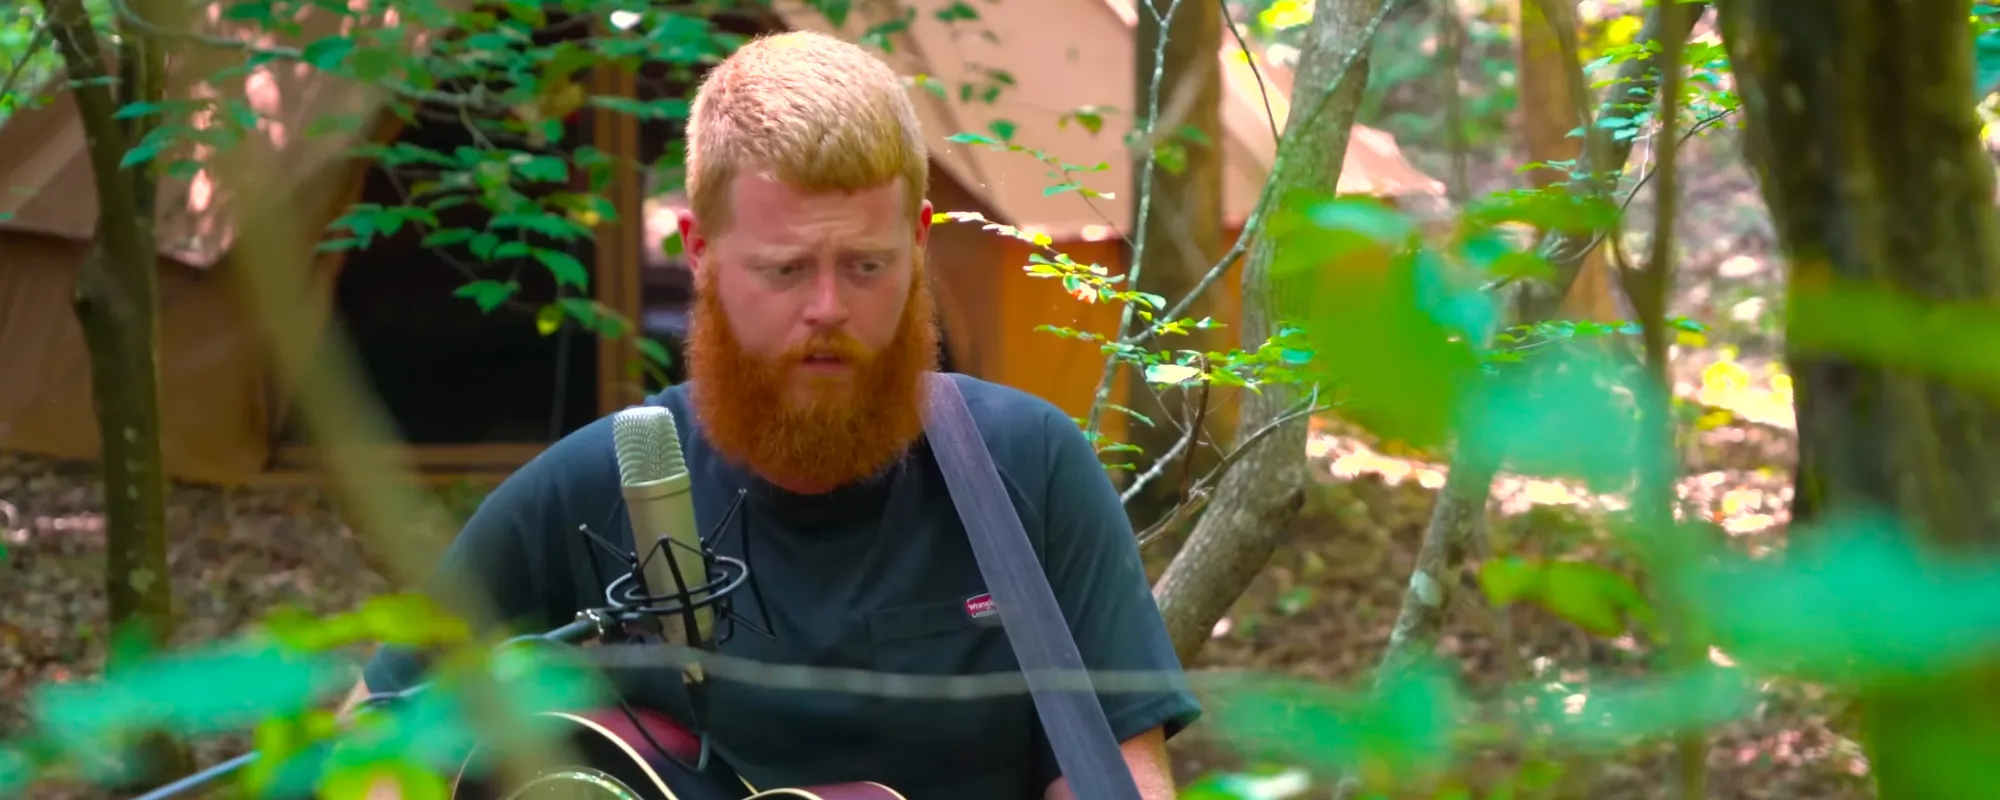 Watch: Oliver Anthony Covers Lynyrd Skynyrd with Shinedown, Papa Roach